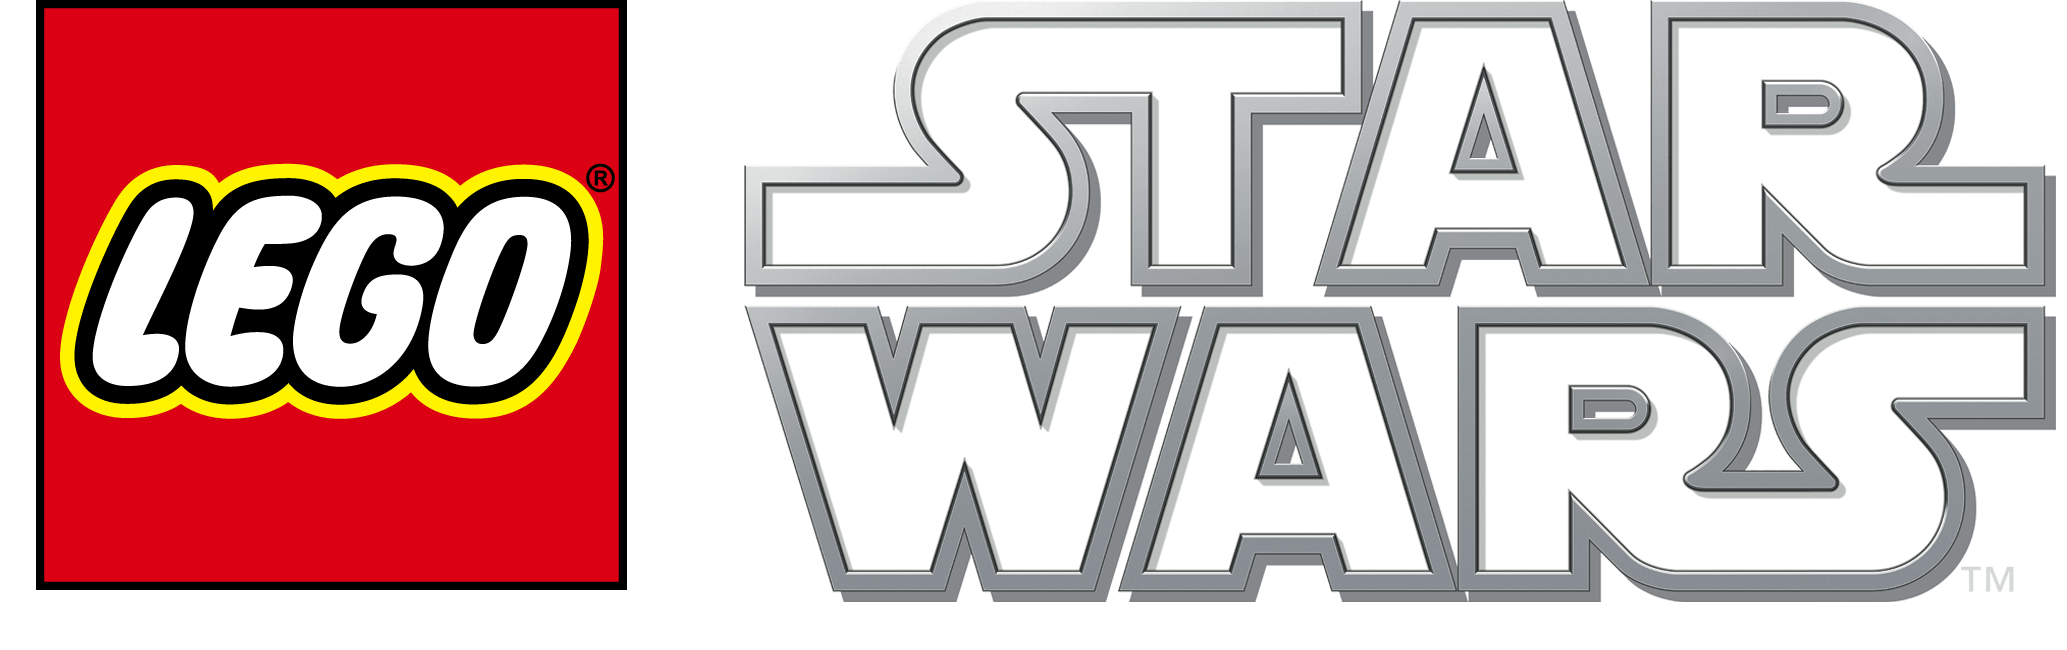 LEGO Star Wars Logo - LEGO Stars Wars sets to release in 2016 | Nothing But Geek